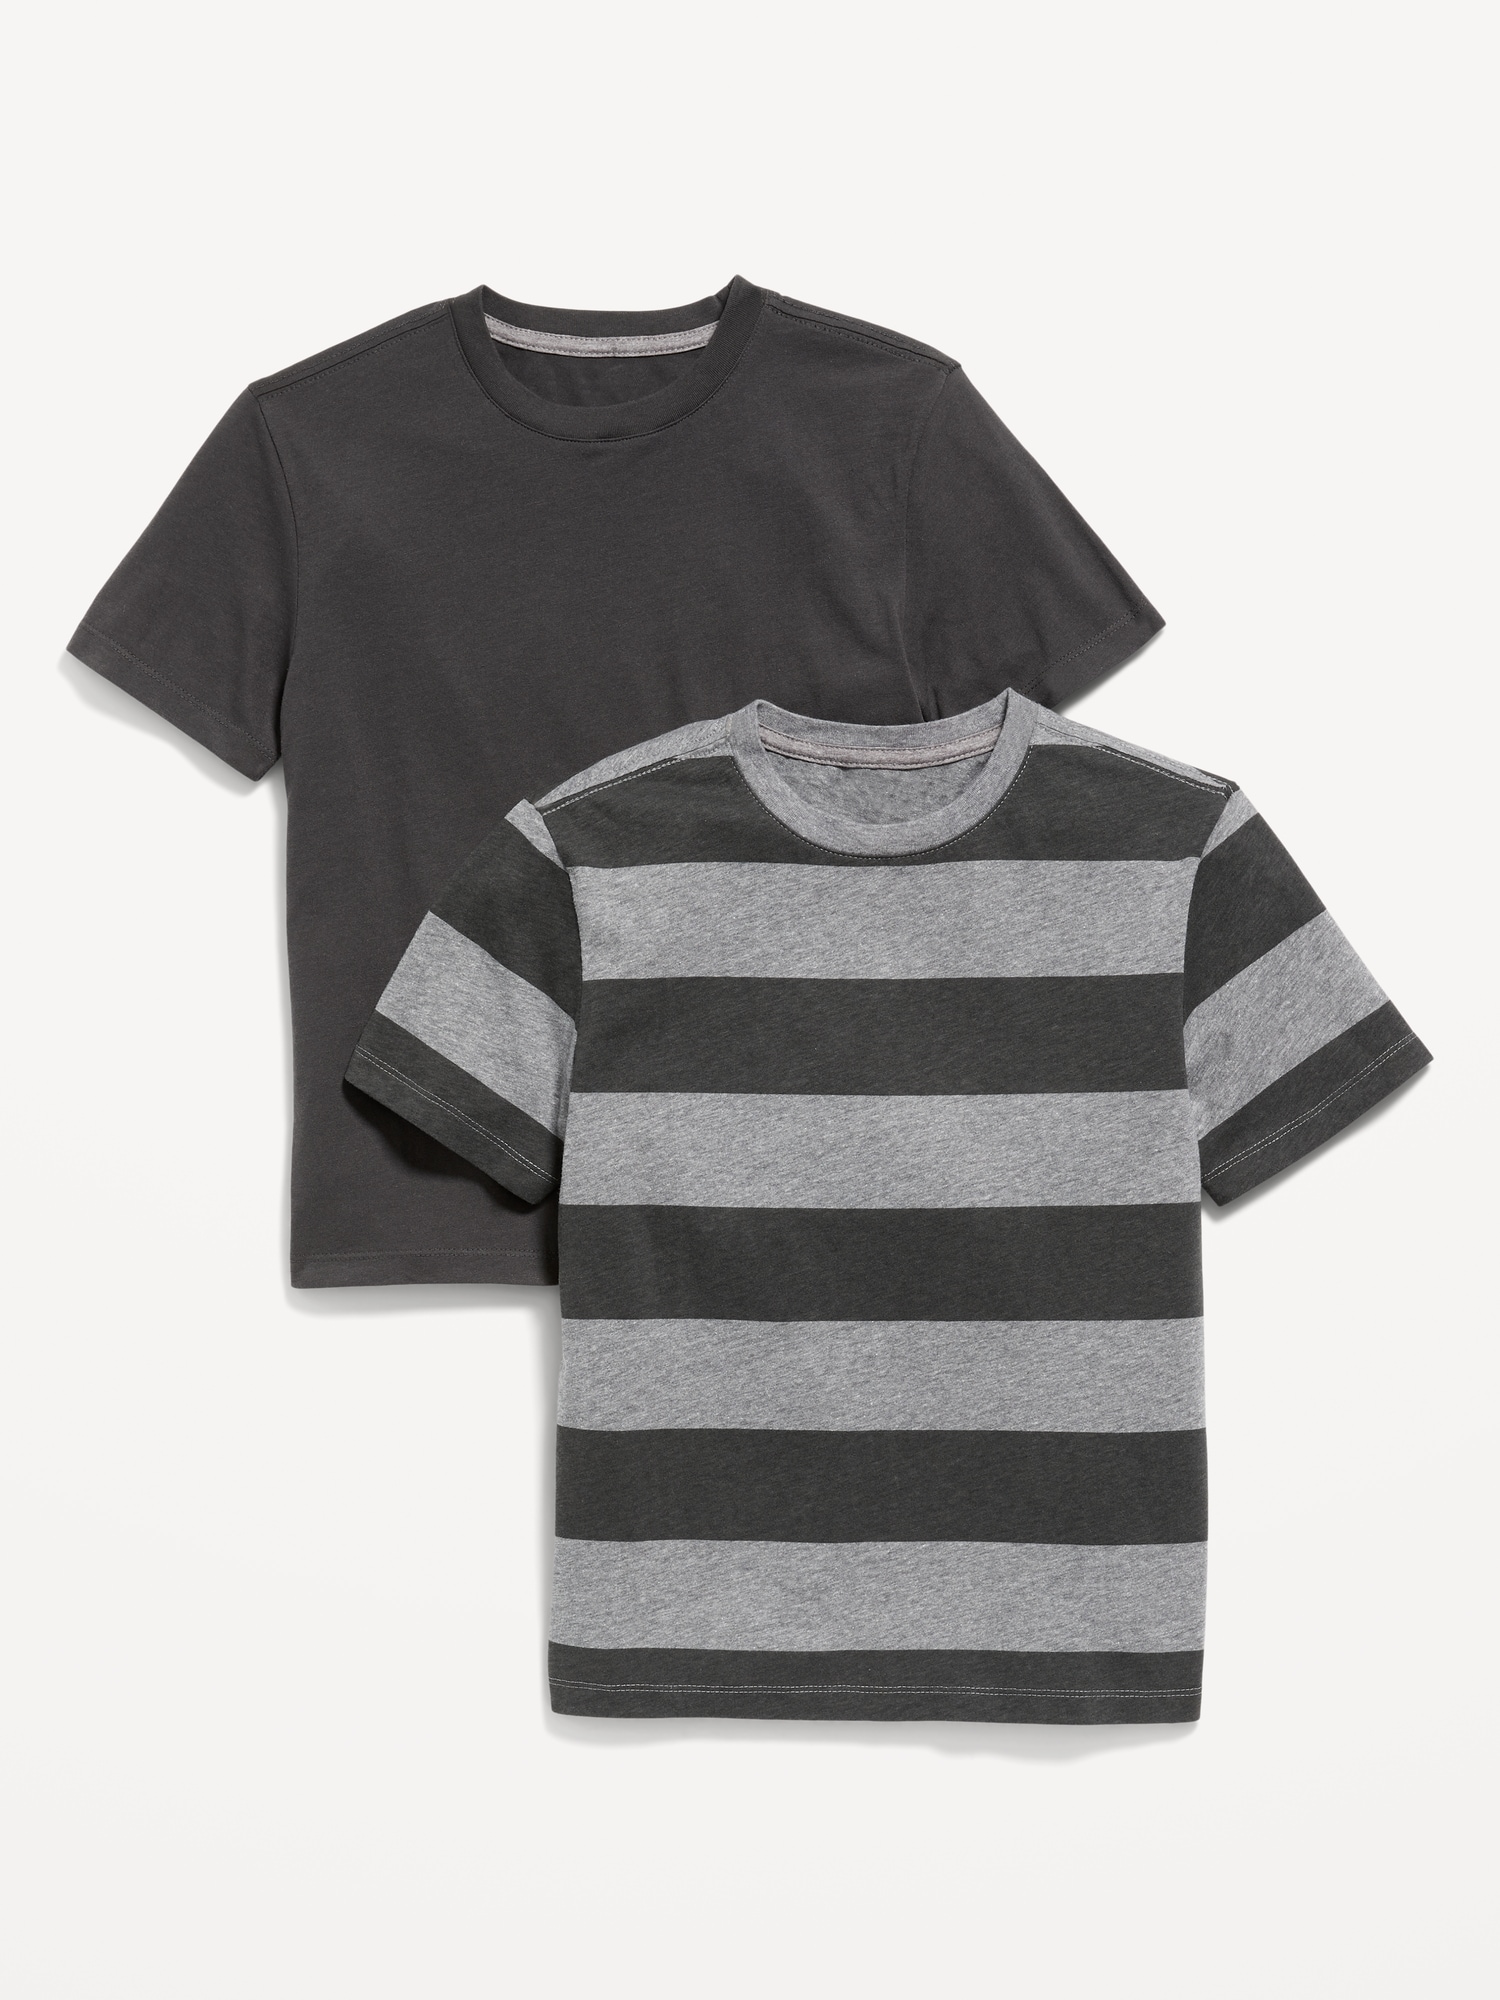 Old Navy Softest Crew-Neck T-Shirt 2-Pack For Boys gray. 1